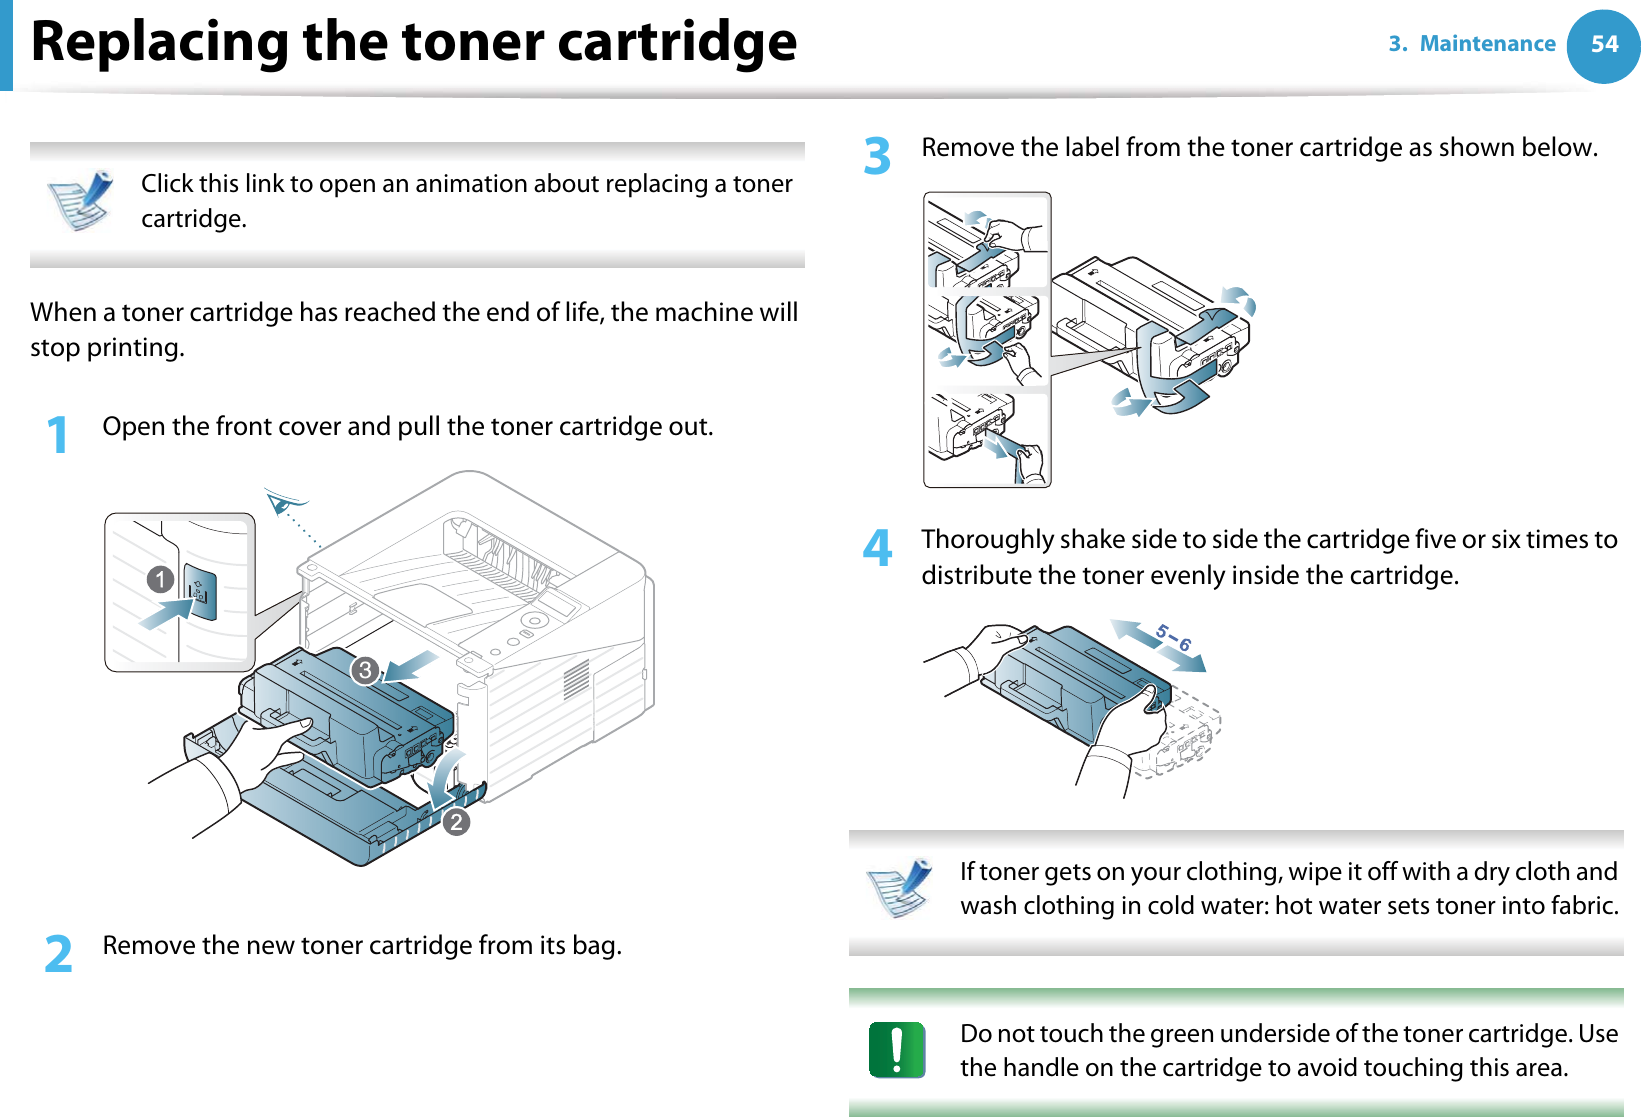 543. MaintenanceReplacing the toner cartridge Click this link to open an animation about replacing a toner cartridge. When a toner cartridge has reached the end of life, the machine will stop printing.1Open the front cover and pull the toner cartridge out.2  Remove the new toner cartridge from its bag. 3  Remove the label from the toner cartridge as shown below.4  Thoroughly shake side to side the cartridge five or six times to distribute the toner evenly inside the cartridge. If toner gets on your clothing, wipe it off with a dry cloth and wash clothing in cold water: hot water sets toner into fabric.  Do not touch the green underside of the toner cartridge. Use the handle on the cartridge to avoid touching this area.  3